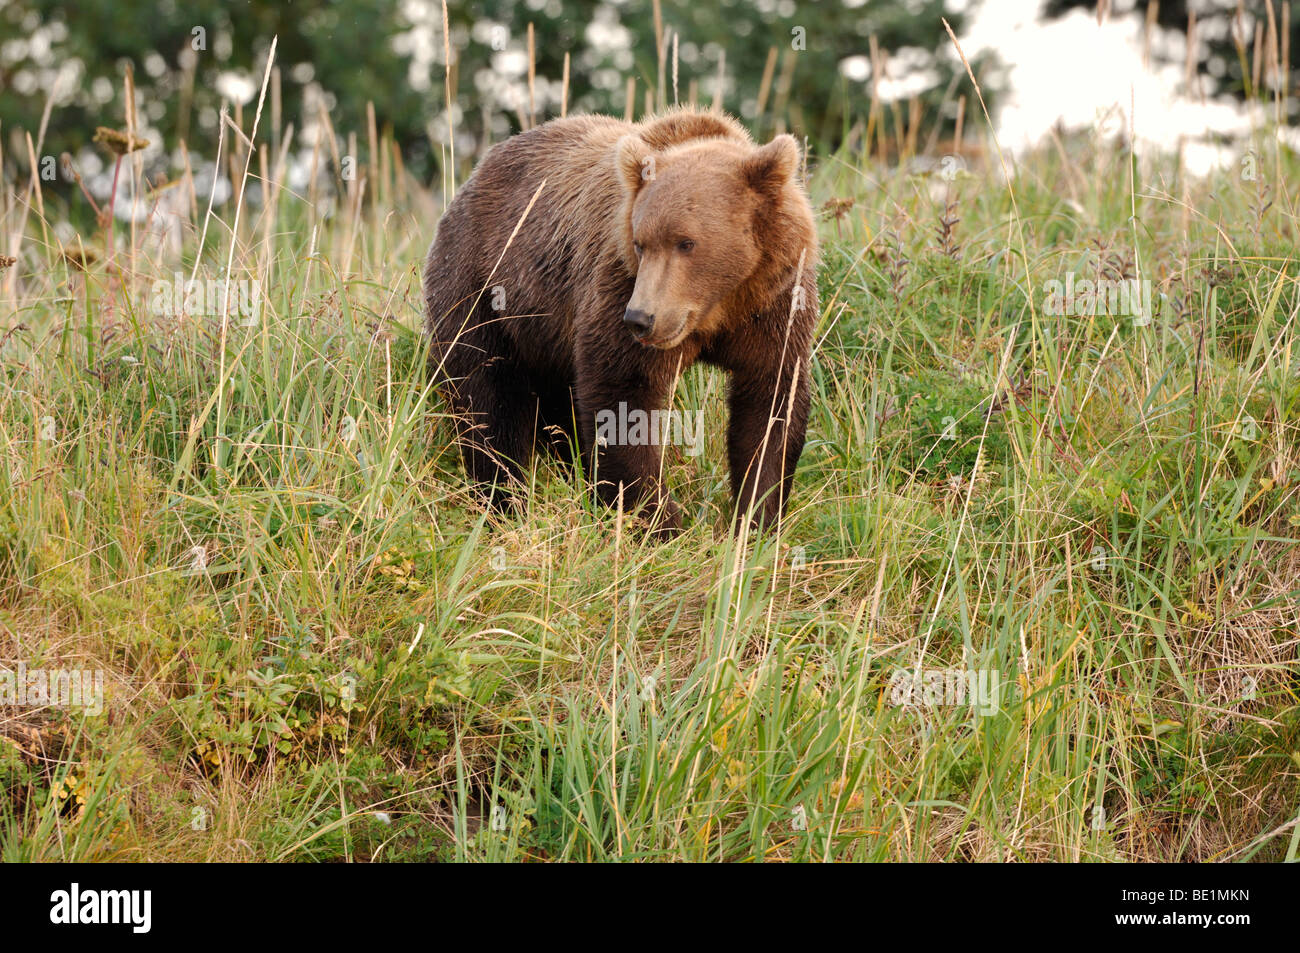 Stock photo of a brown bear standing in a sedge meadow, Lake Clark National Park, Alaska, 2009. Stock Photo